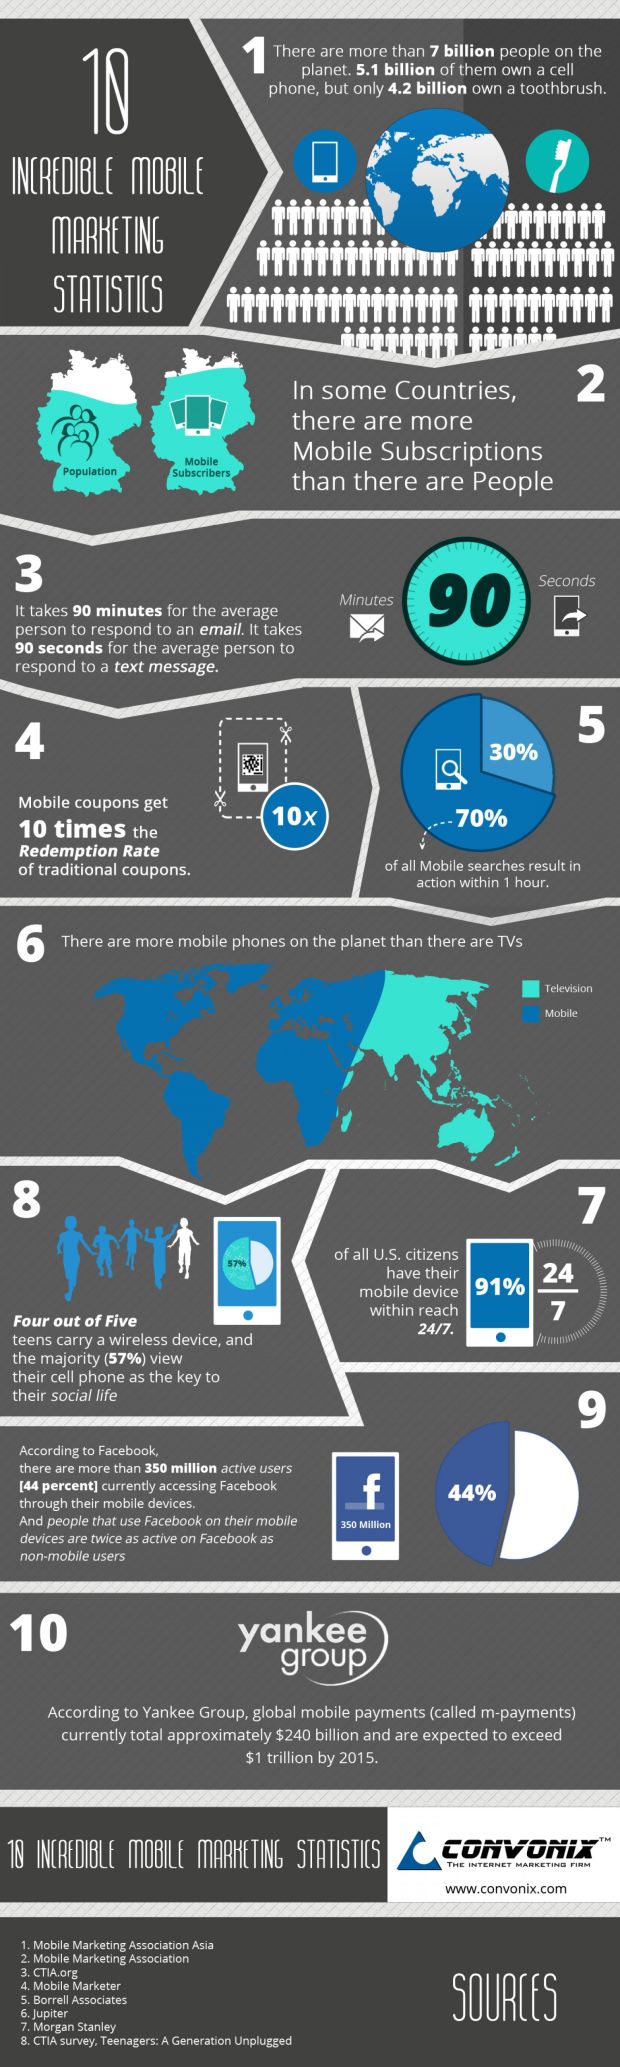 10-incredible-mobile-marketing-insights